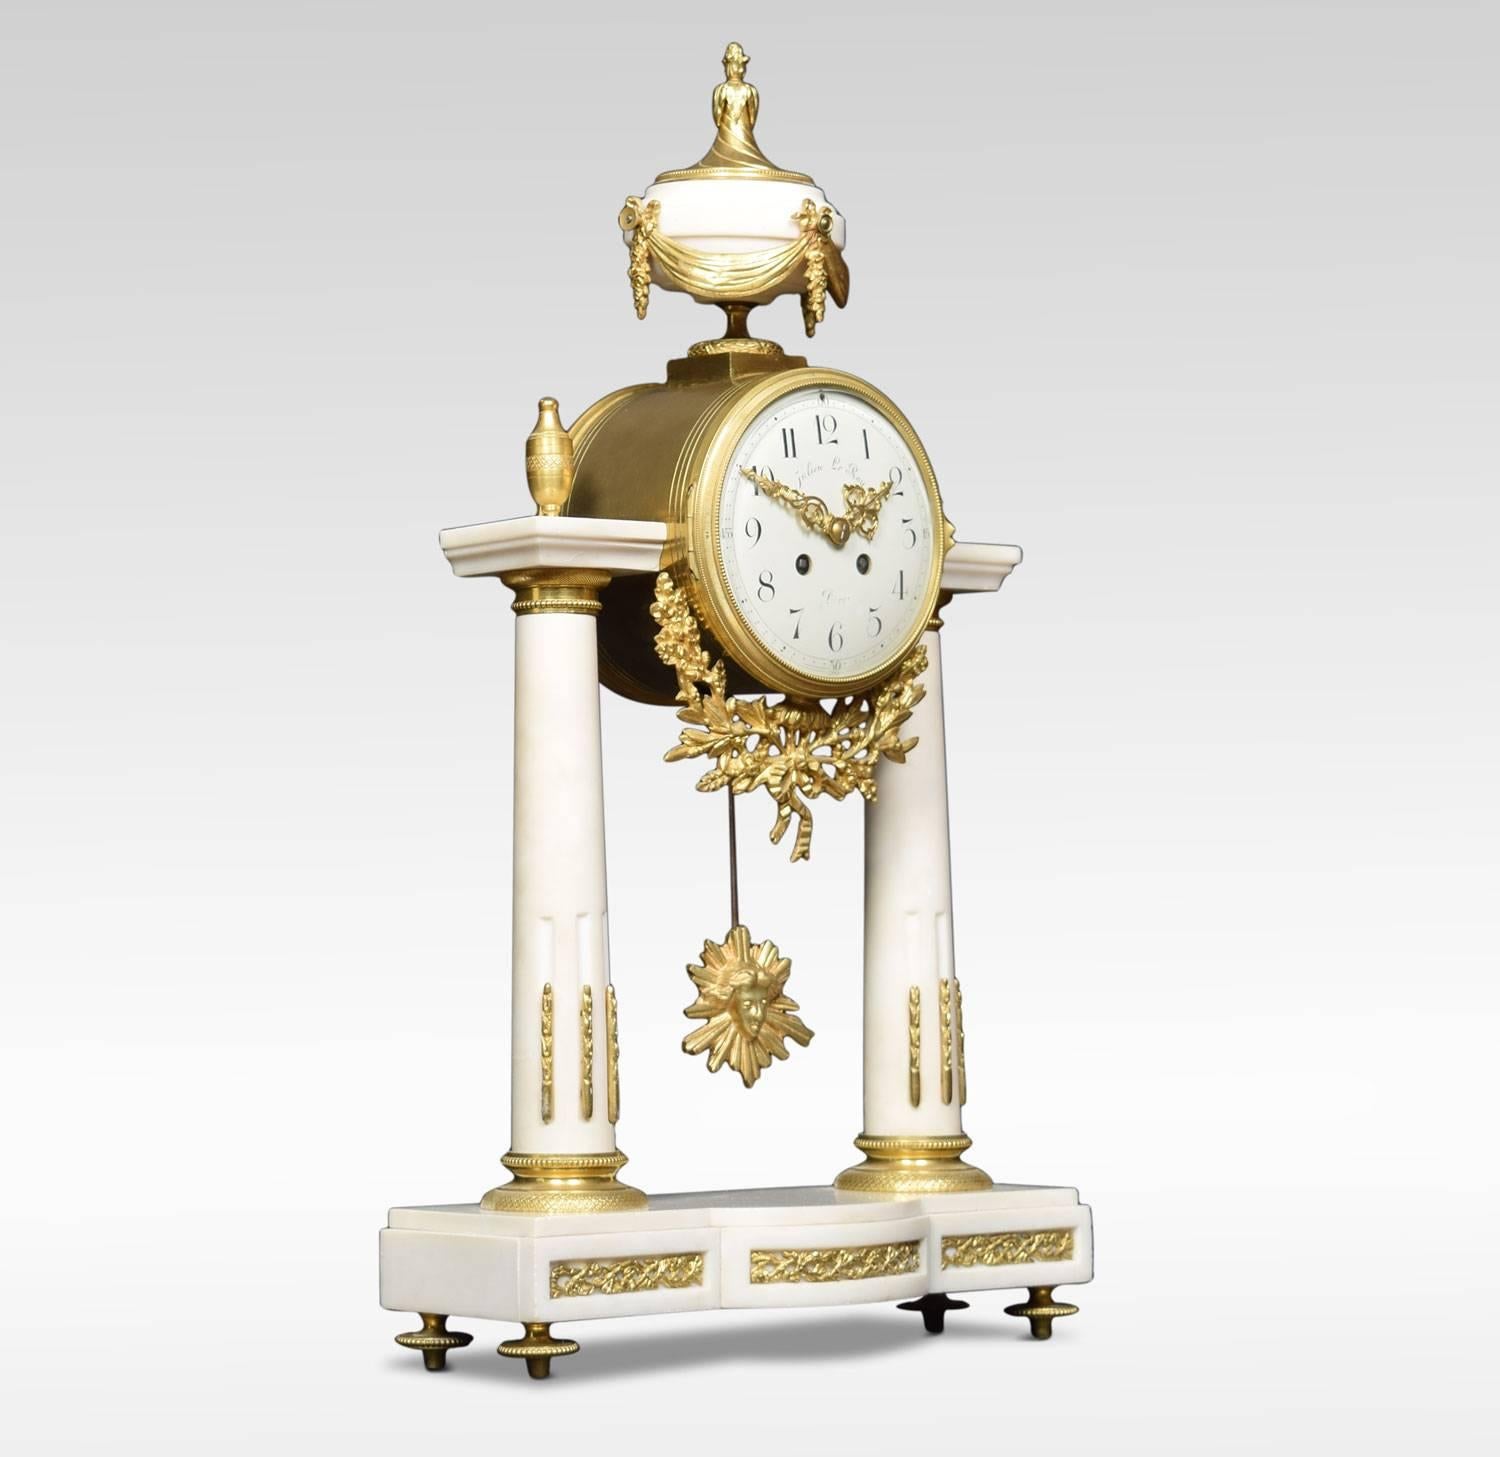 19th century French white marble portico clock. The French cylinder eight day movement striking on a bell, with white enamel 5.5 inch dial and black Arabic numerals. The movement has been fully serviced and is in full working condition. The marble